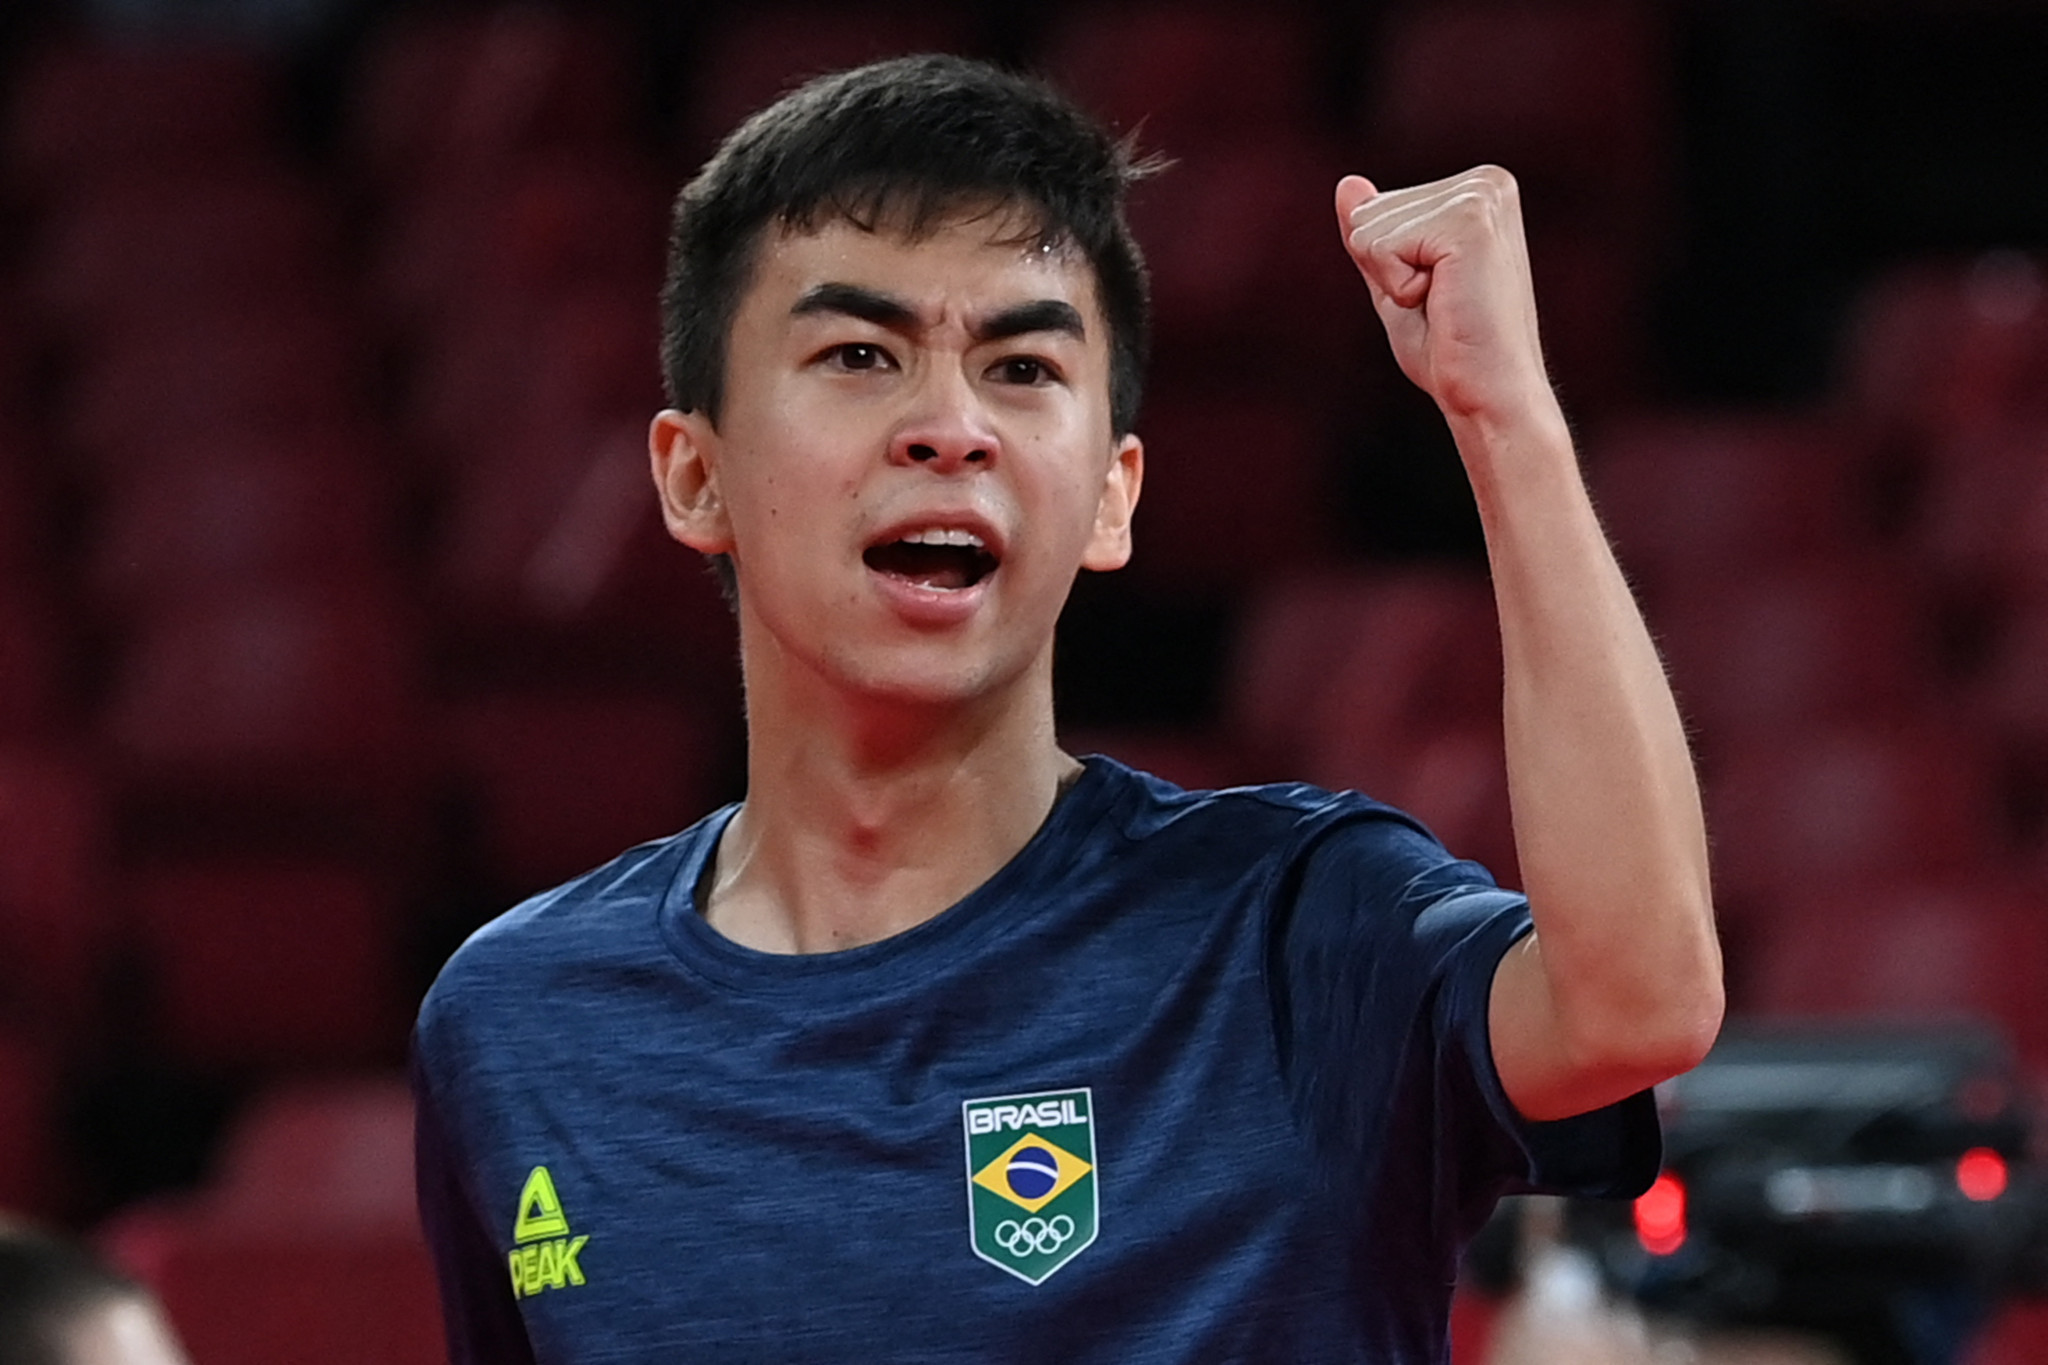 The Brazil men's team have won the men's team title at every Pan American Table Tennis Championships since its creation in 2017 ©Getty Images